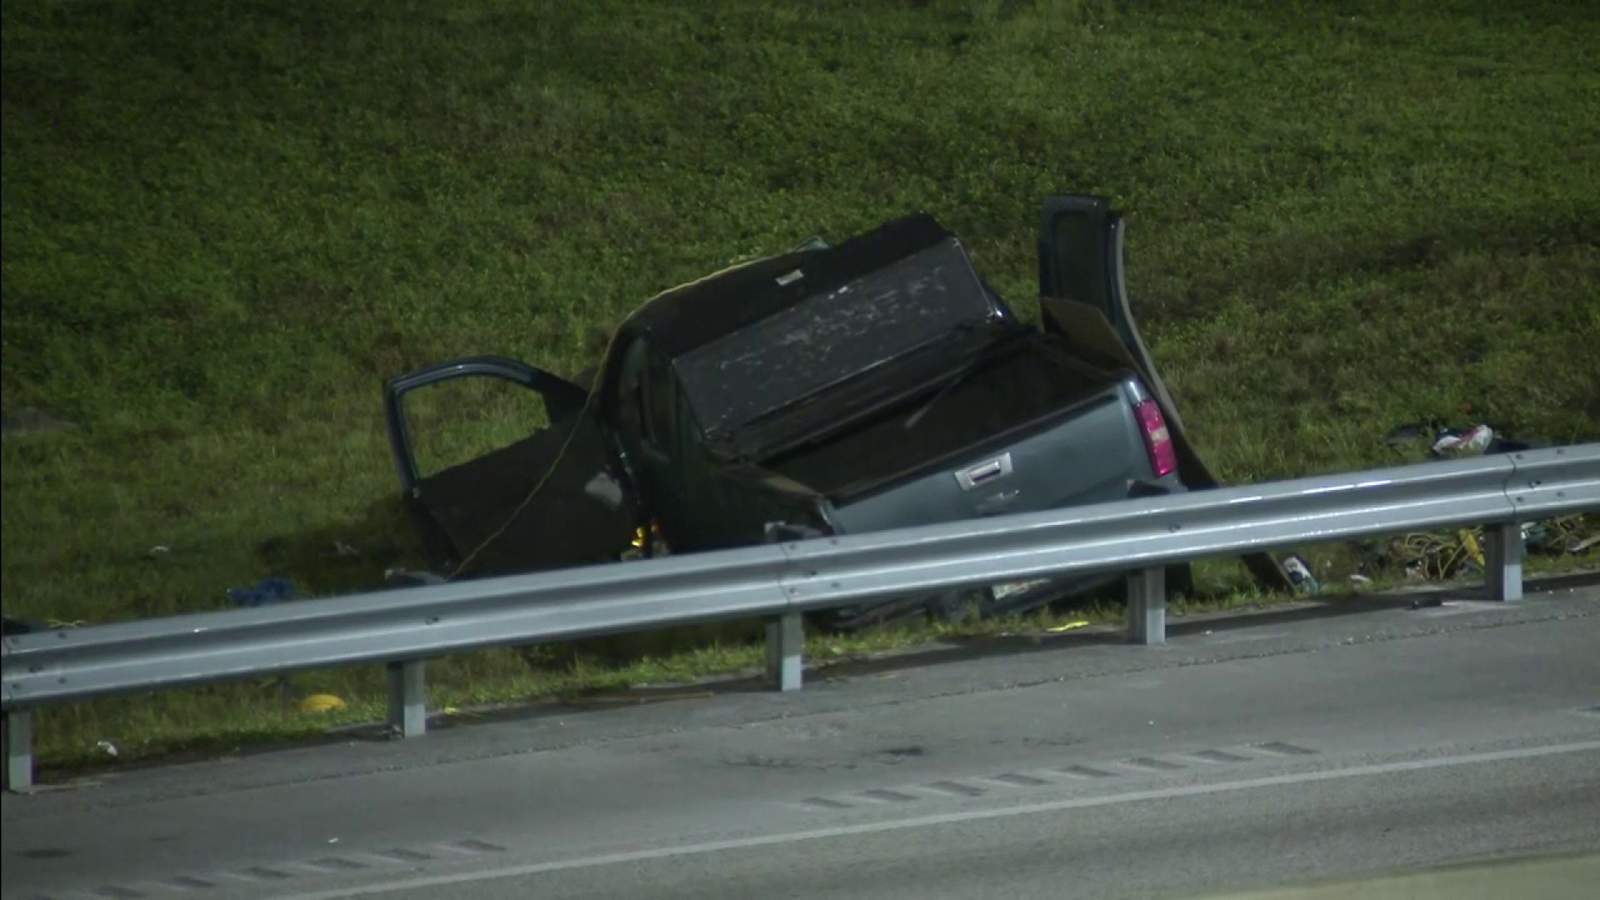 Teen driver dies after being ejected from pickup truck during crash in Southwest Miami-Dade